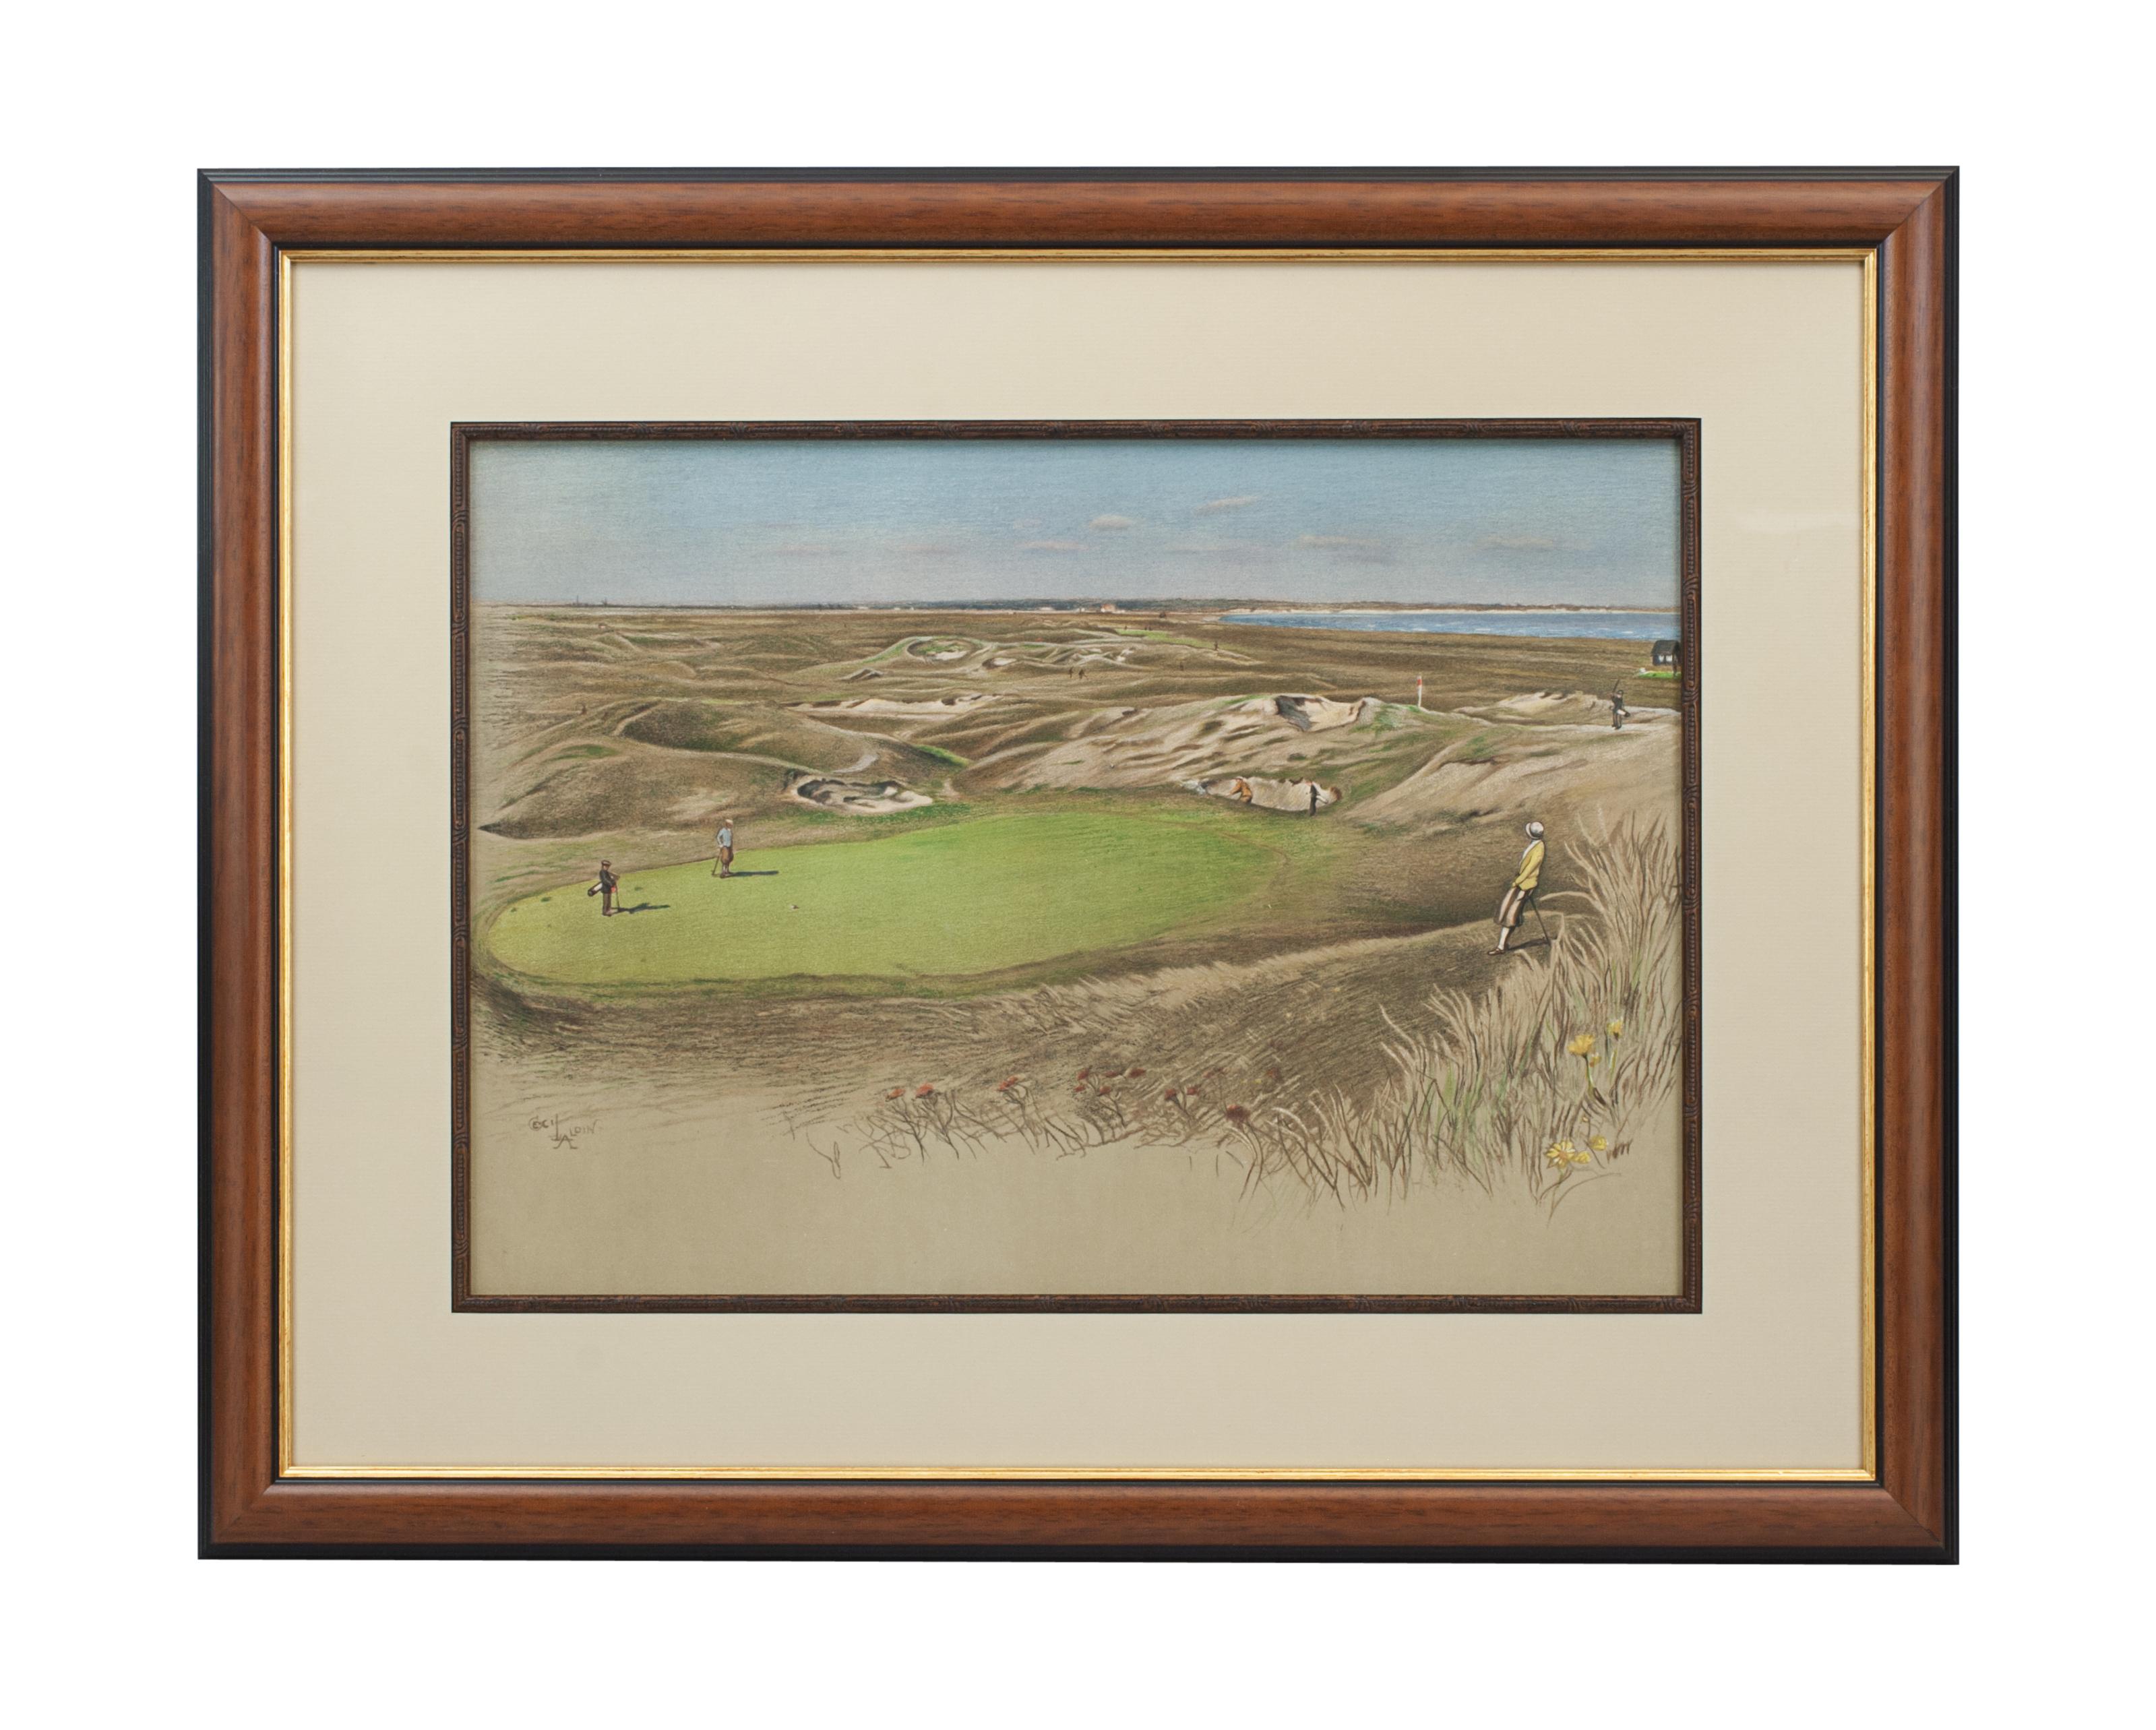 Royal St. George's after Cecil Aldin.
A mounted and framed golf photolithograph of Royal St. George's, Sandwich, 